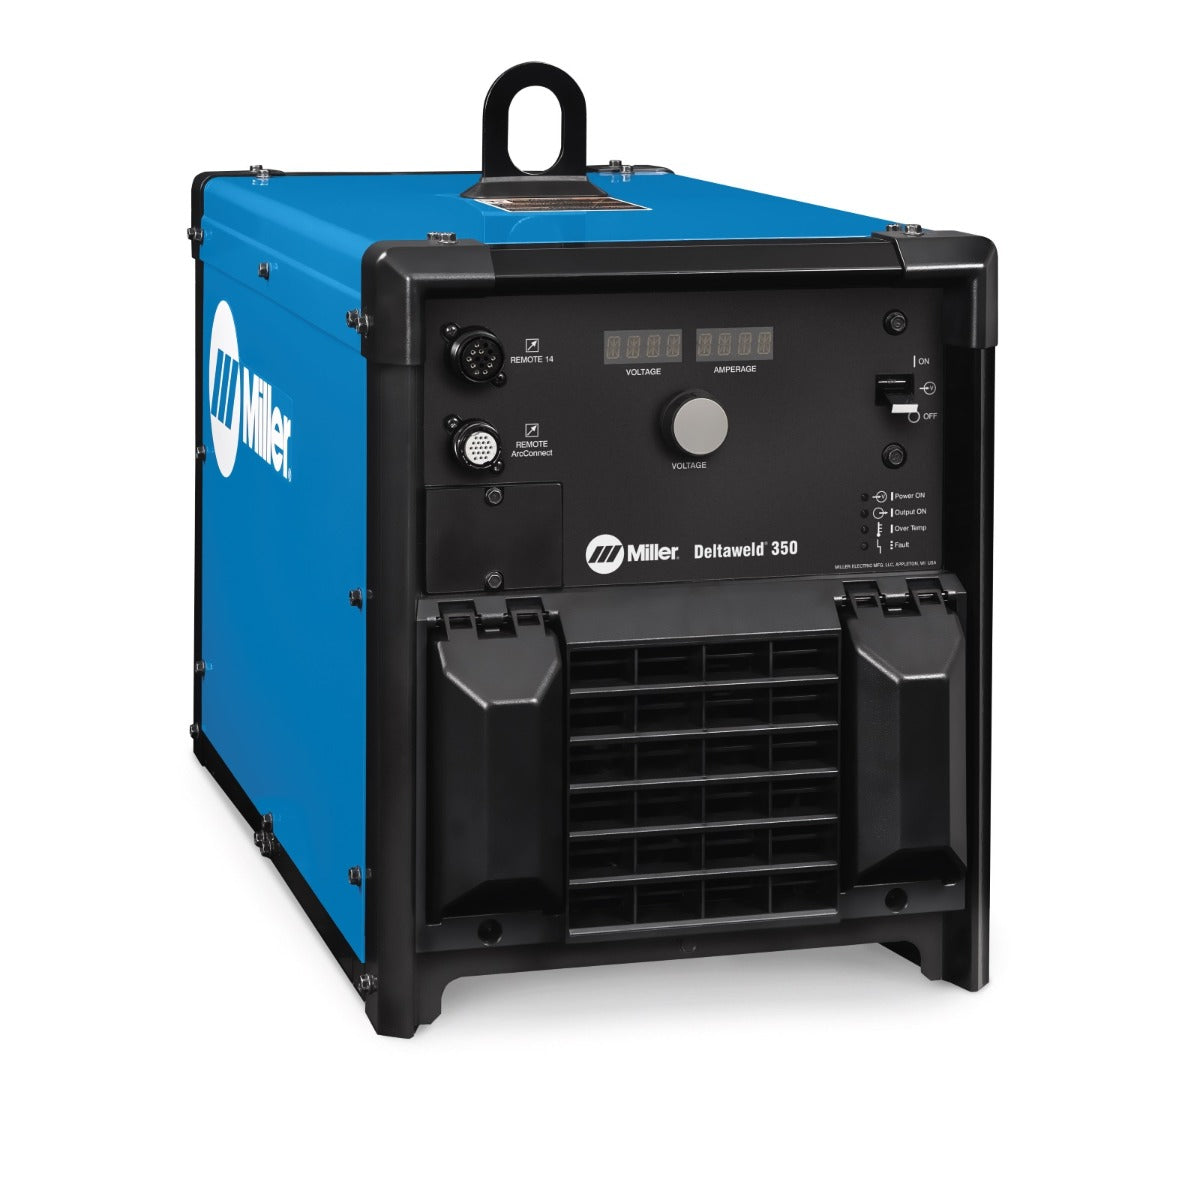 Miller Deltaweld 350 Power Source w/ArcConnect and Meters (907747001)